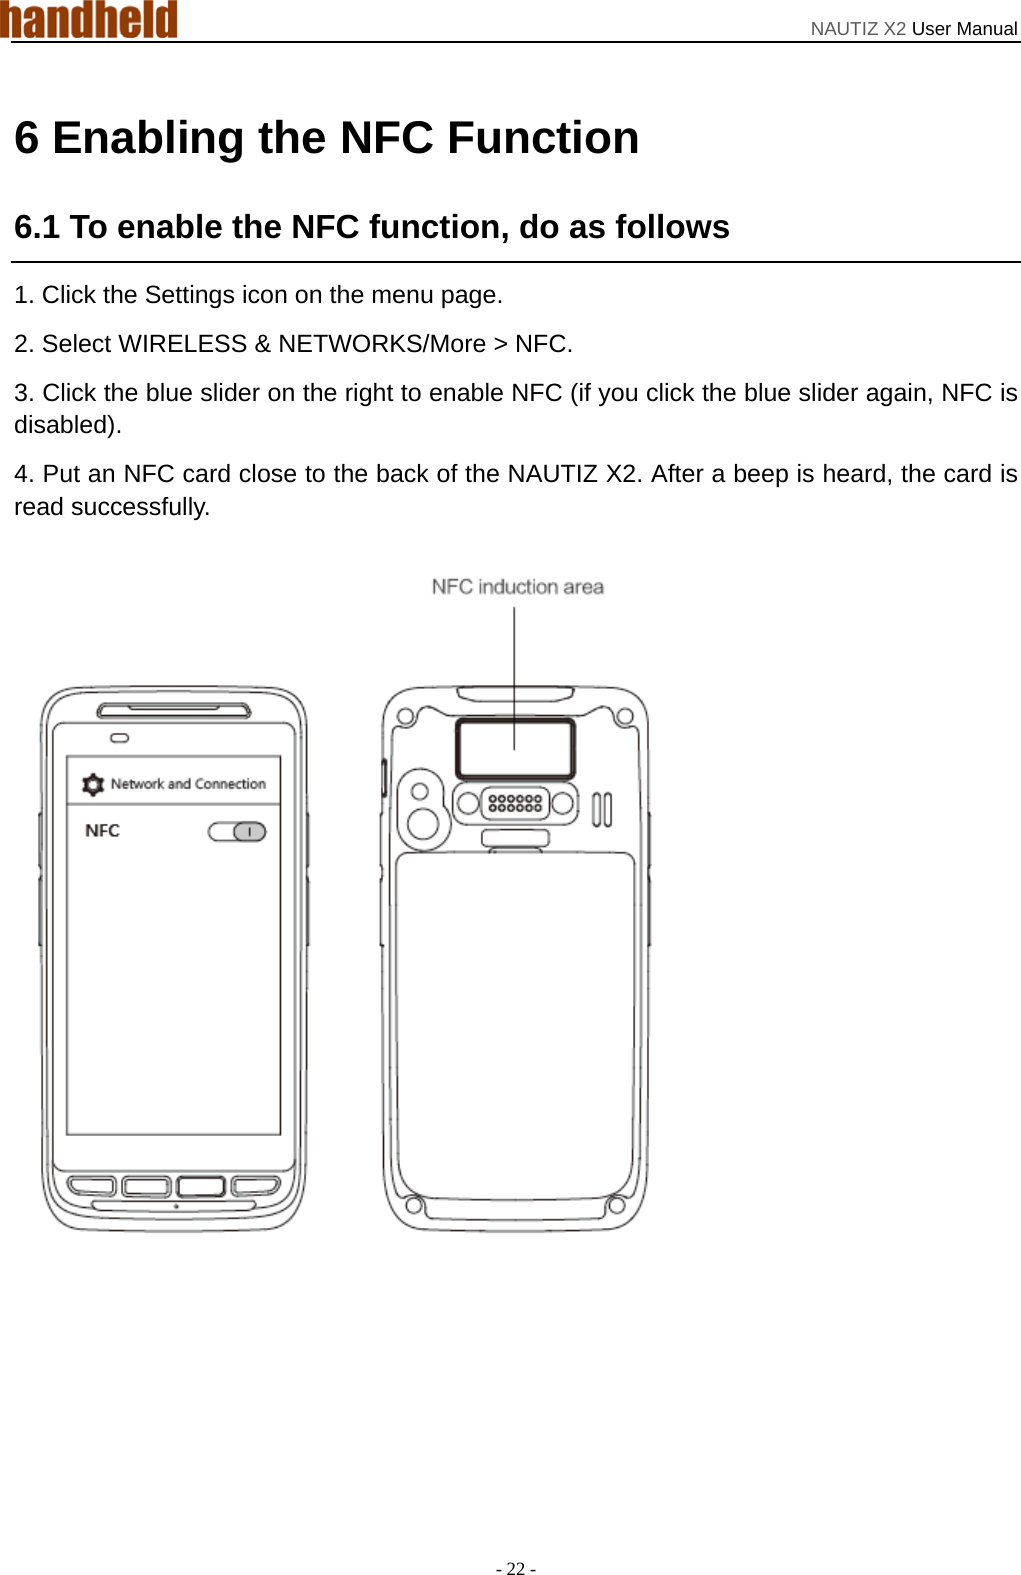 NAUTIZ X2 User Manual - 22 - 6 Enabling the NFC Function 6.1 To enable the NFC function, do as follows 1. Click the Settings icon on the menu page. 2. Select WIRELESS &amp; NETWORKS/More &gt; NFC.   3. Click the blue slider on the right to enable NFC (if you click the blue slider again, NFC is disabled). 4. Put an NFC card close to the back of the NAUTIZ X2. After a beep is heard, the card is read successfully. 